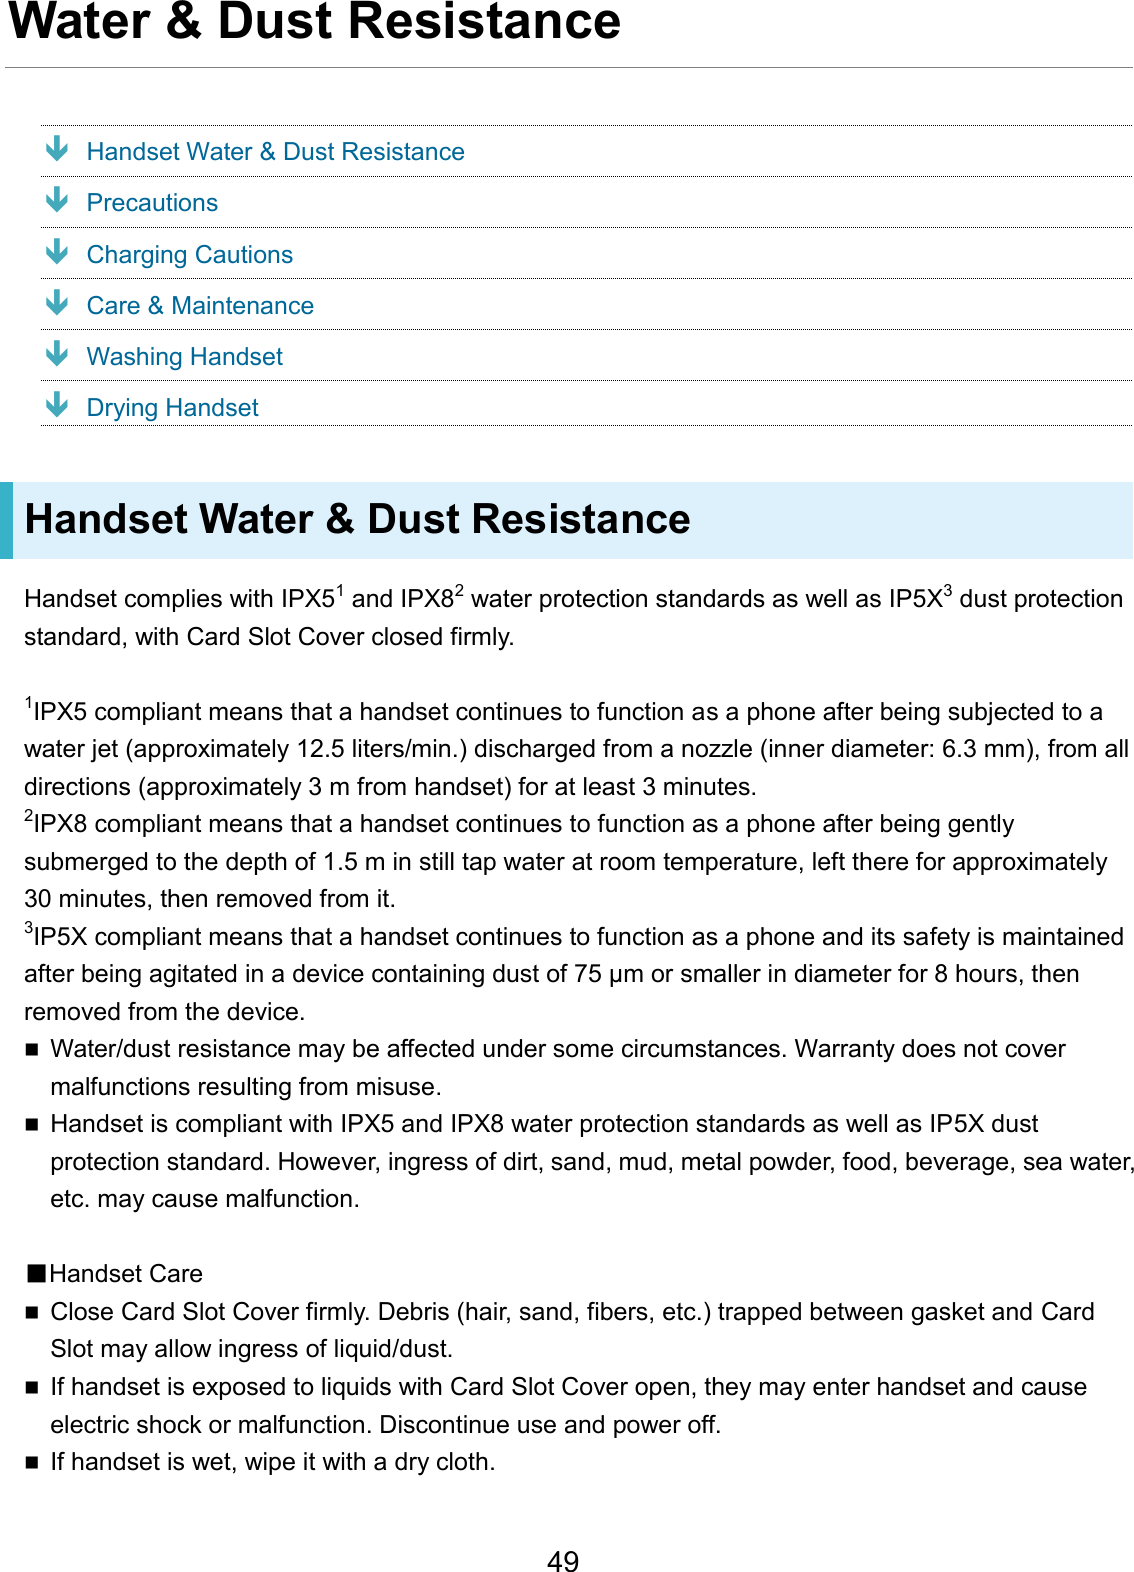 Water &amp; Dust Resistance Handset Water &amp; Dust Resistance Precautions Charging Cautions Care &amp; Maintenance Washing Handset Drying Handset Handset Water &amp; Dust Resistance Handset complies with IPX51 and IPX82 water protection standards as well as IP5X3 dust protection standard, with Card Slot Cover closed firmly. 1IPX5 compliant means that a handset continues to function as a phone after being subjected to a water jet (approximately 12.5 liters/min.) discharged from a nozzle (inner diameter: 6.3 mm), from all directions (approximately 3 m from handset) for at least 3 minutes. 2IPX8 compliant means that a handset continues to function as a phone after being gently submerged to the depth of 1.5 m in still tap water at room temperature, left there for approximately 30 minutes, then removed from it. 3IP5X compliant means that a handset continues to function as a phone and its safety is maintained after being agitated in a device containing dust of 75 μm or smaller in diameter for 8 hours, then removed from the device. Water/dust resistance may be affected under some circumstances. Warranty does not covermalfunctions resulting from misuse.Handset is compliant with IPX5 and IPX8 water protection standards as well as IP5X dustprotection standard. However, ingress of dirt, sand, mud, metal powder, food, beverage, sea water,etc. may cause malfunction.■Handset CareClose Card Slot Cover firmly. Debris (hair, sand, fibers, etc.) trapped between gasket and CardSlot may allow ingress of liquid/dust.If handset is exposed to liquids with Card Slot Cover open, they may enter handset and causeelectric shock or malfunction. Discontinue use and power off.If handset is wet, wipe it with a dry cloth.49